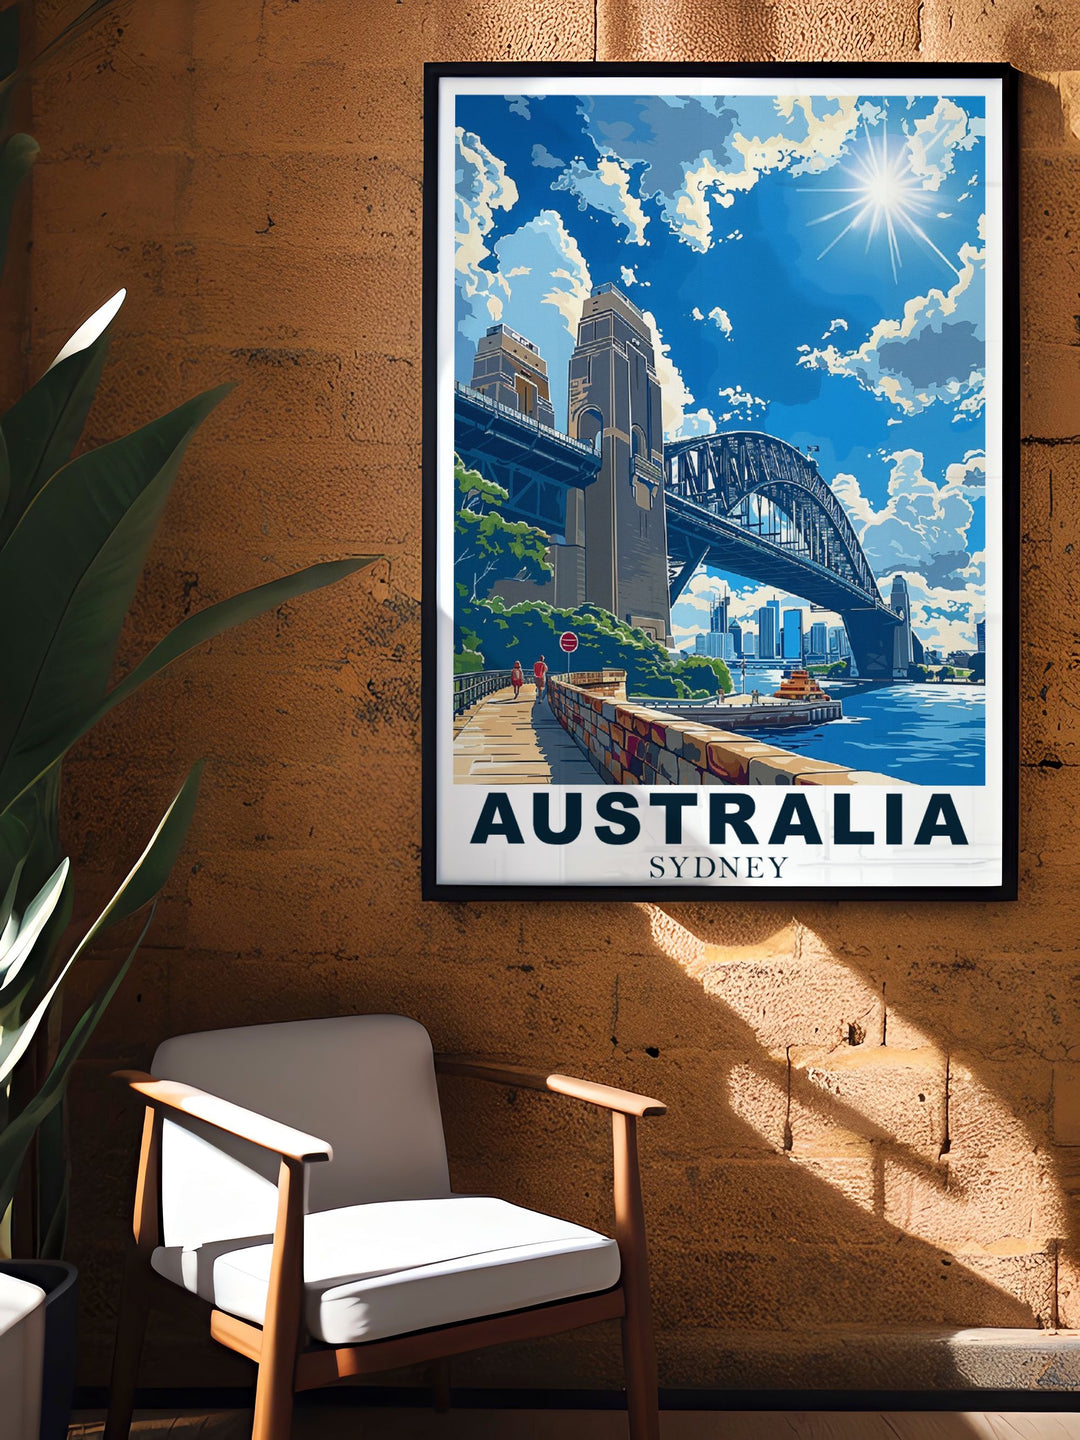 Highlighting the natural beauty of Kakadu National Park, this travel poster features lush landscapes and dramatic waterfalls, ideal for nature enthusiasts and home decor lovers.